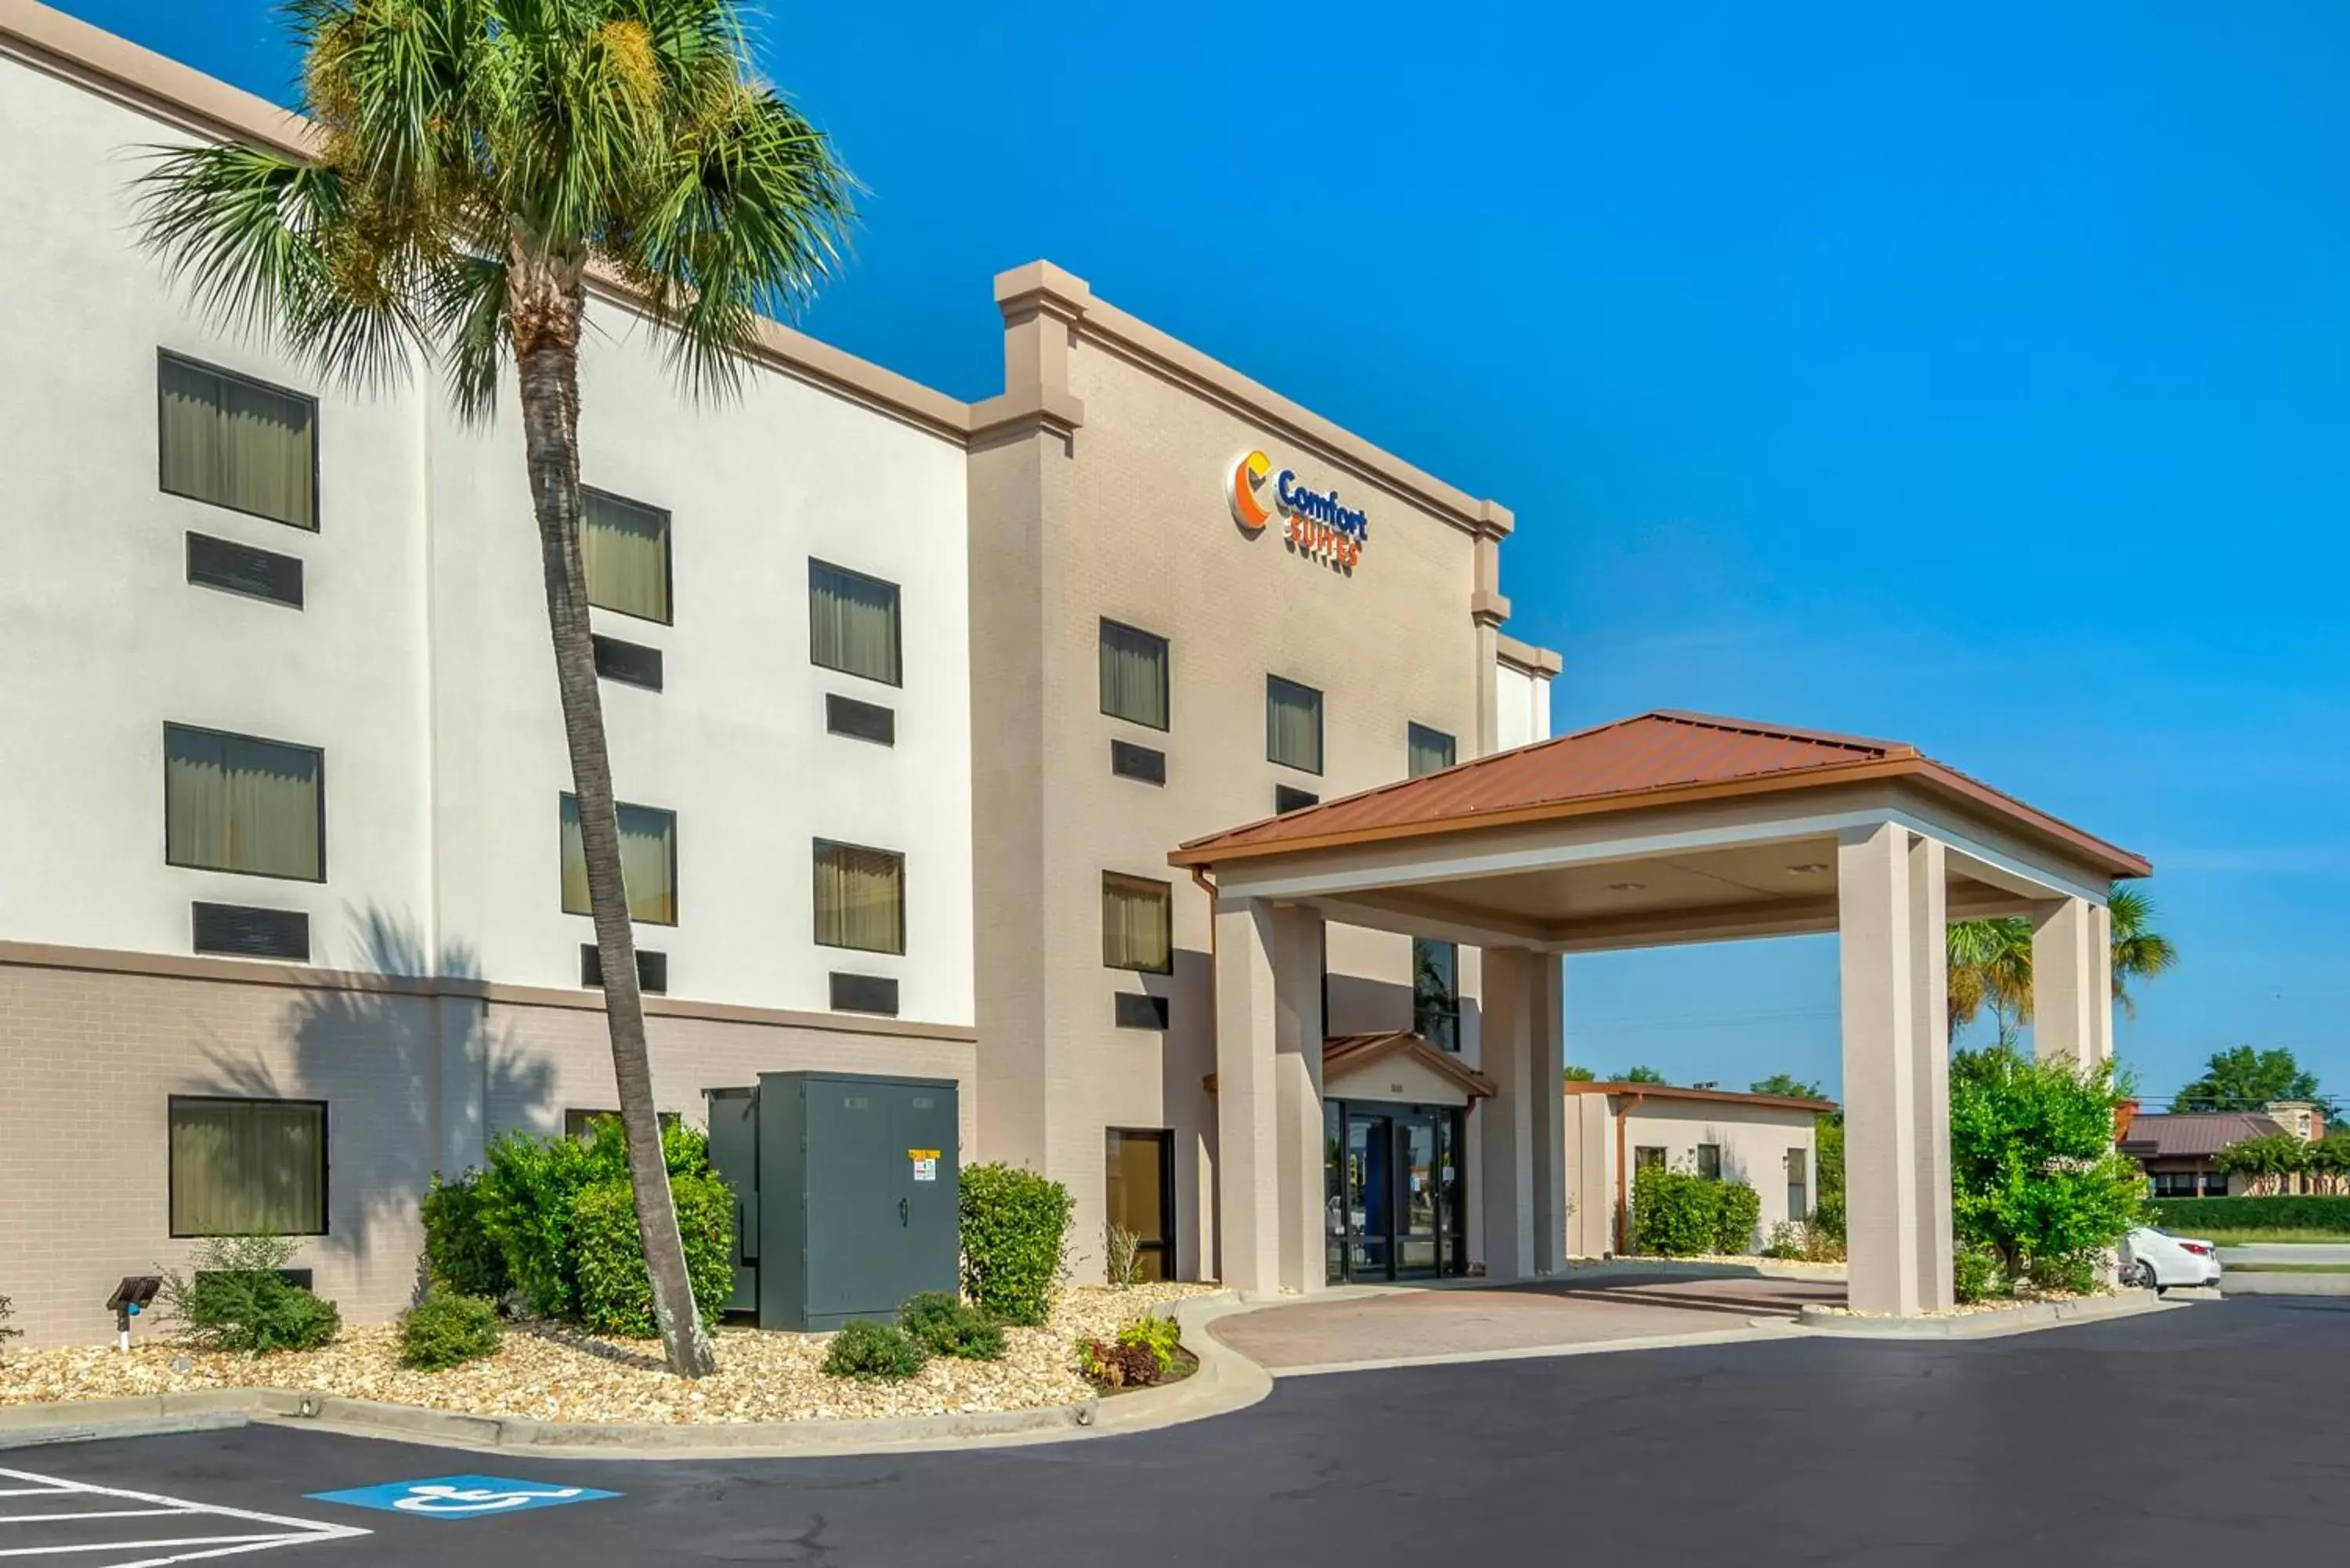 Property Building in Comfort Suites near Robins Air Force Base